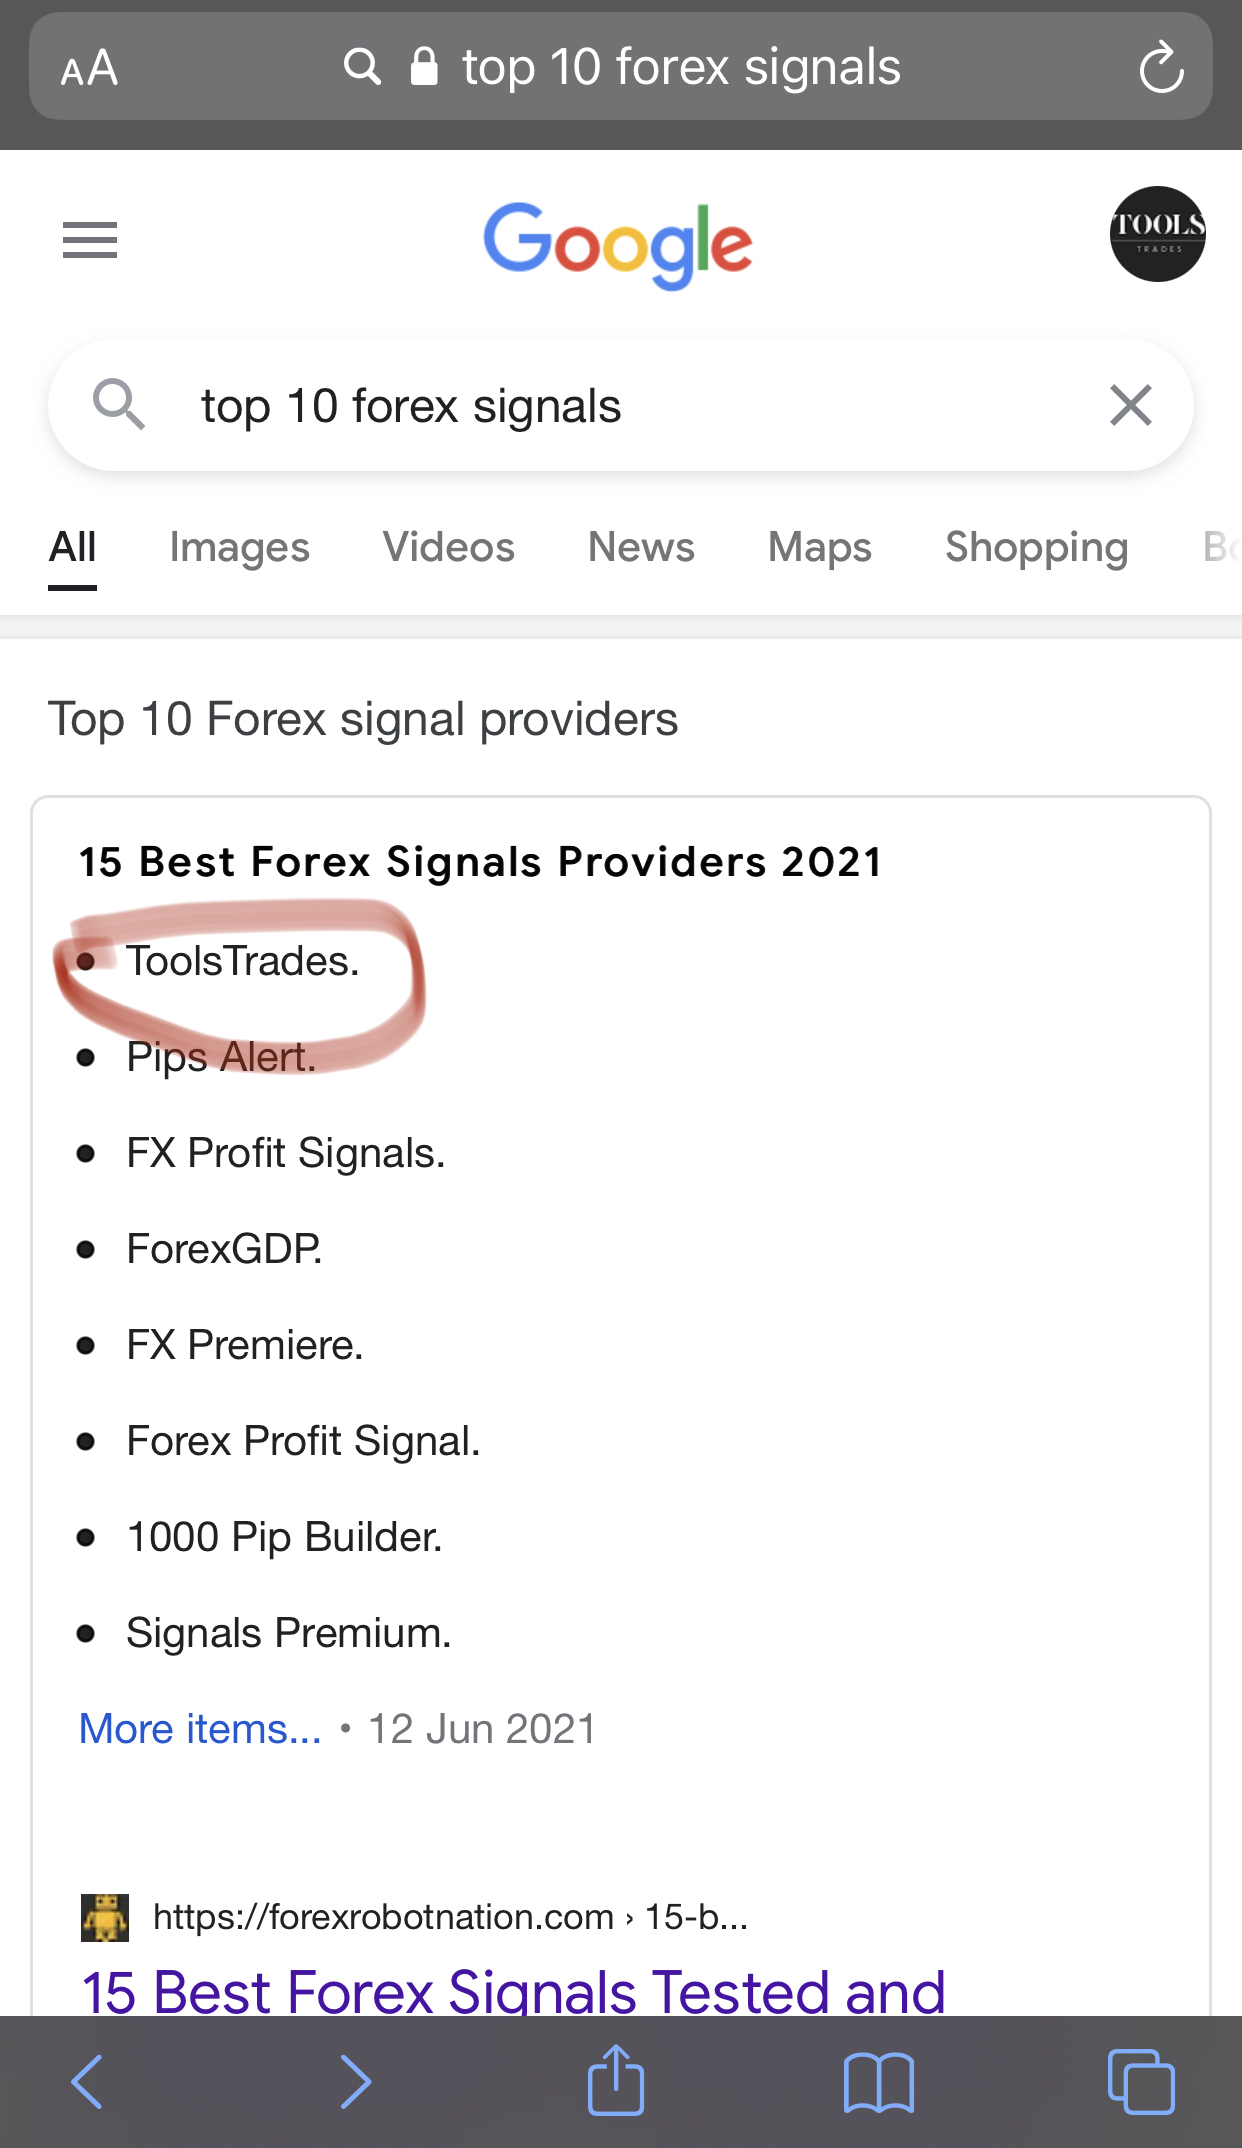 Top 10 Trading Signals Providers